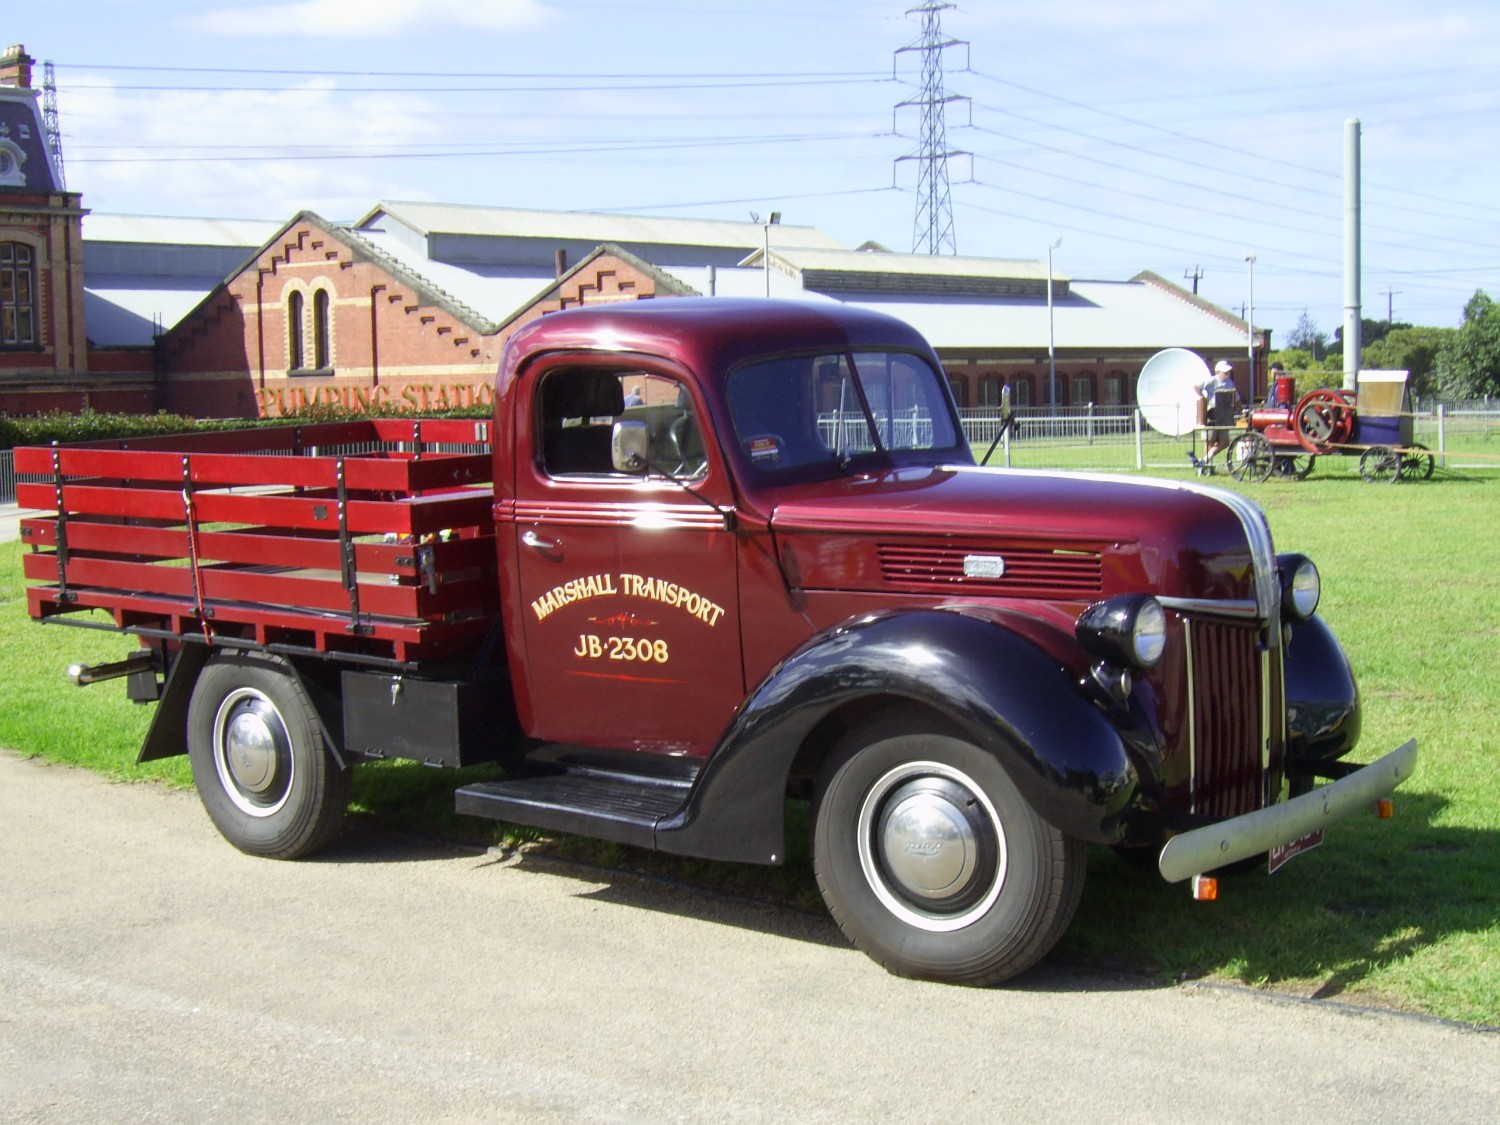 1941 Ford 25cwt